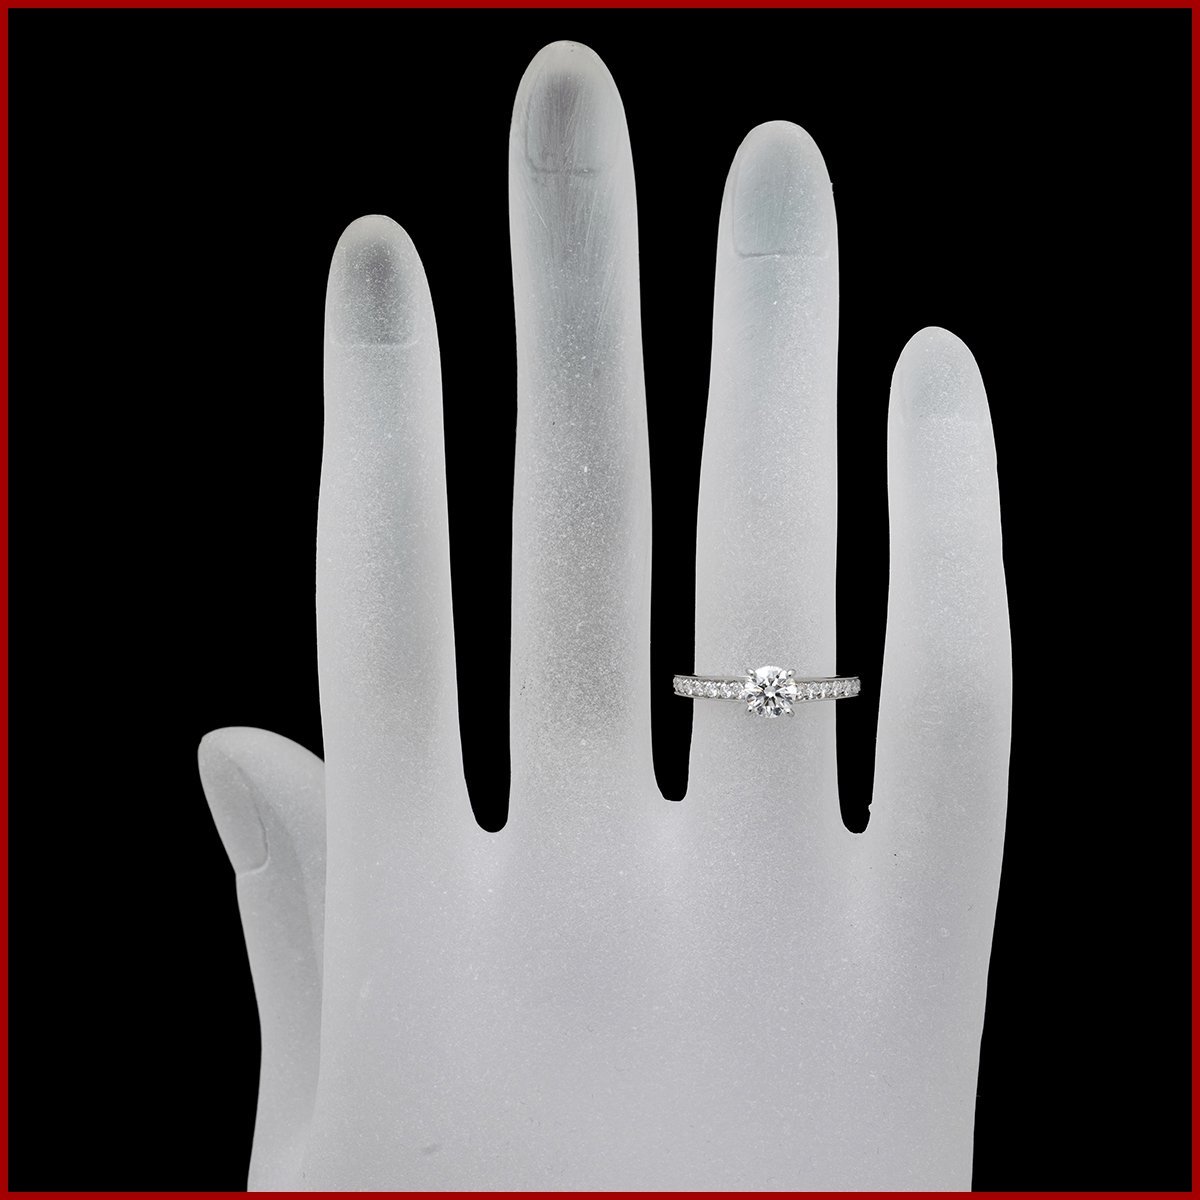  Cartier 1895 sleigh tail half diamond ring ring Pt950 platinum 0.43ct G-VVS2-VG 47 7 number beautiful goods new goods finishing settled guarantee &GIA expert evidence equipped 